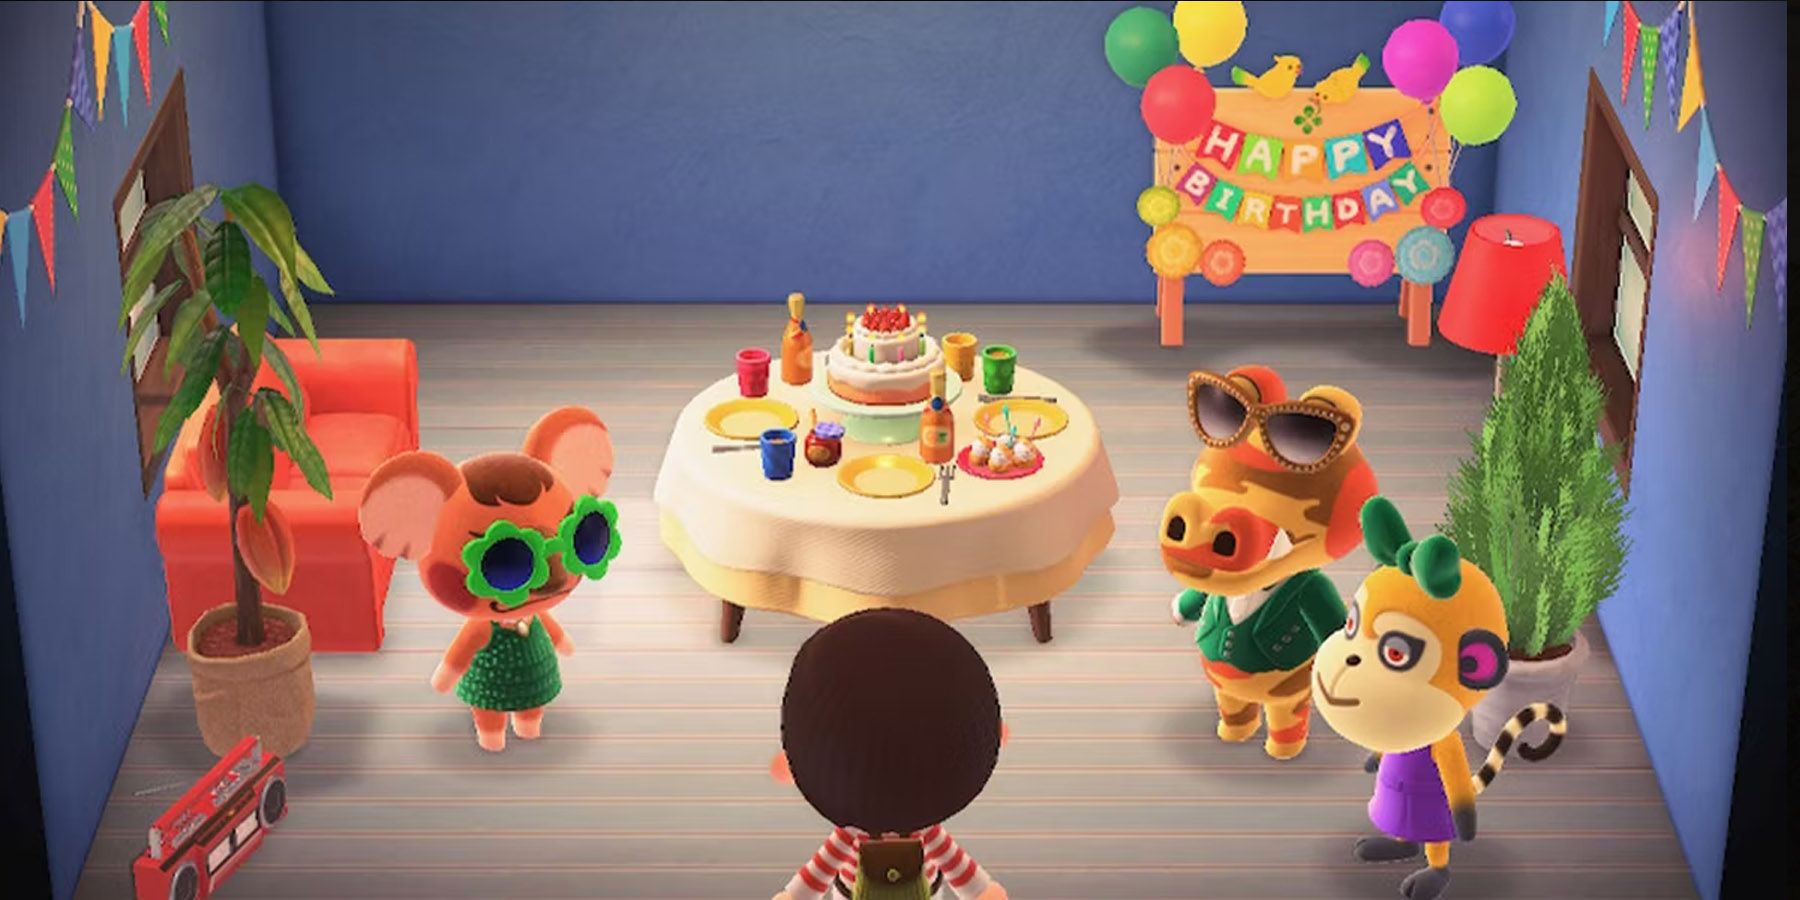 Villagers surprising players on their birthday